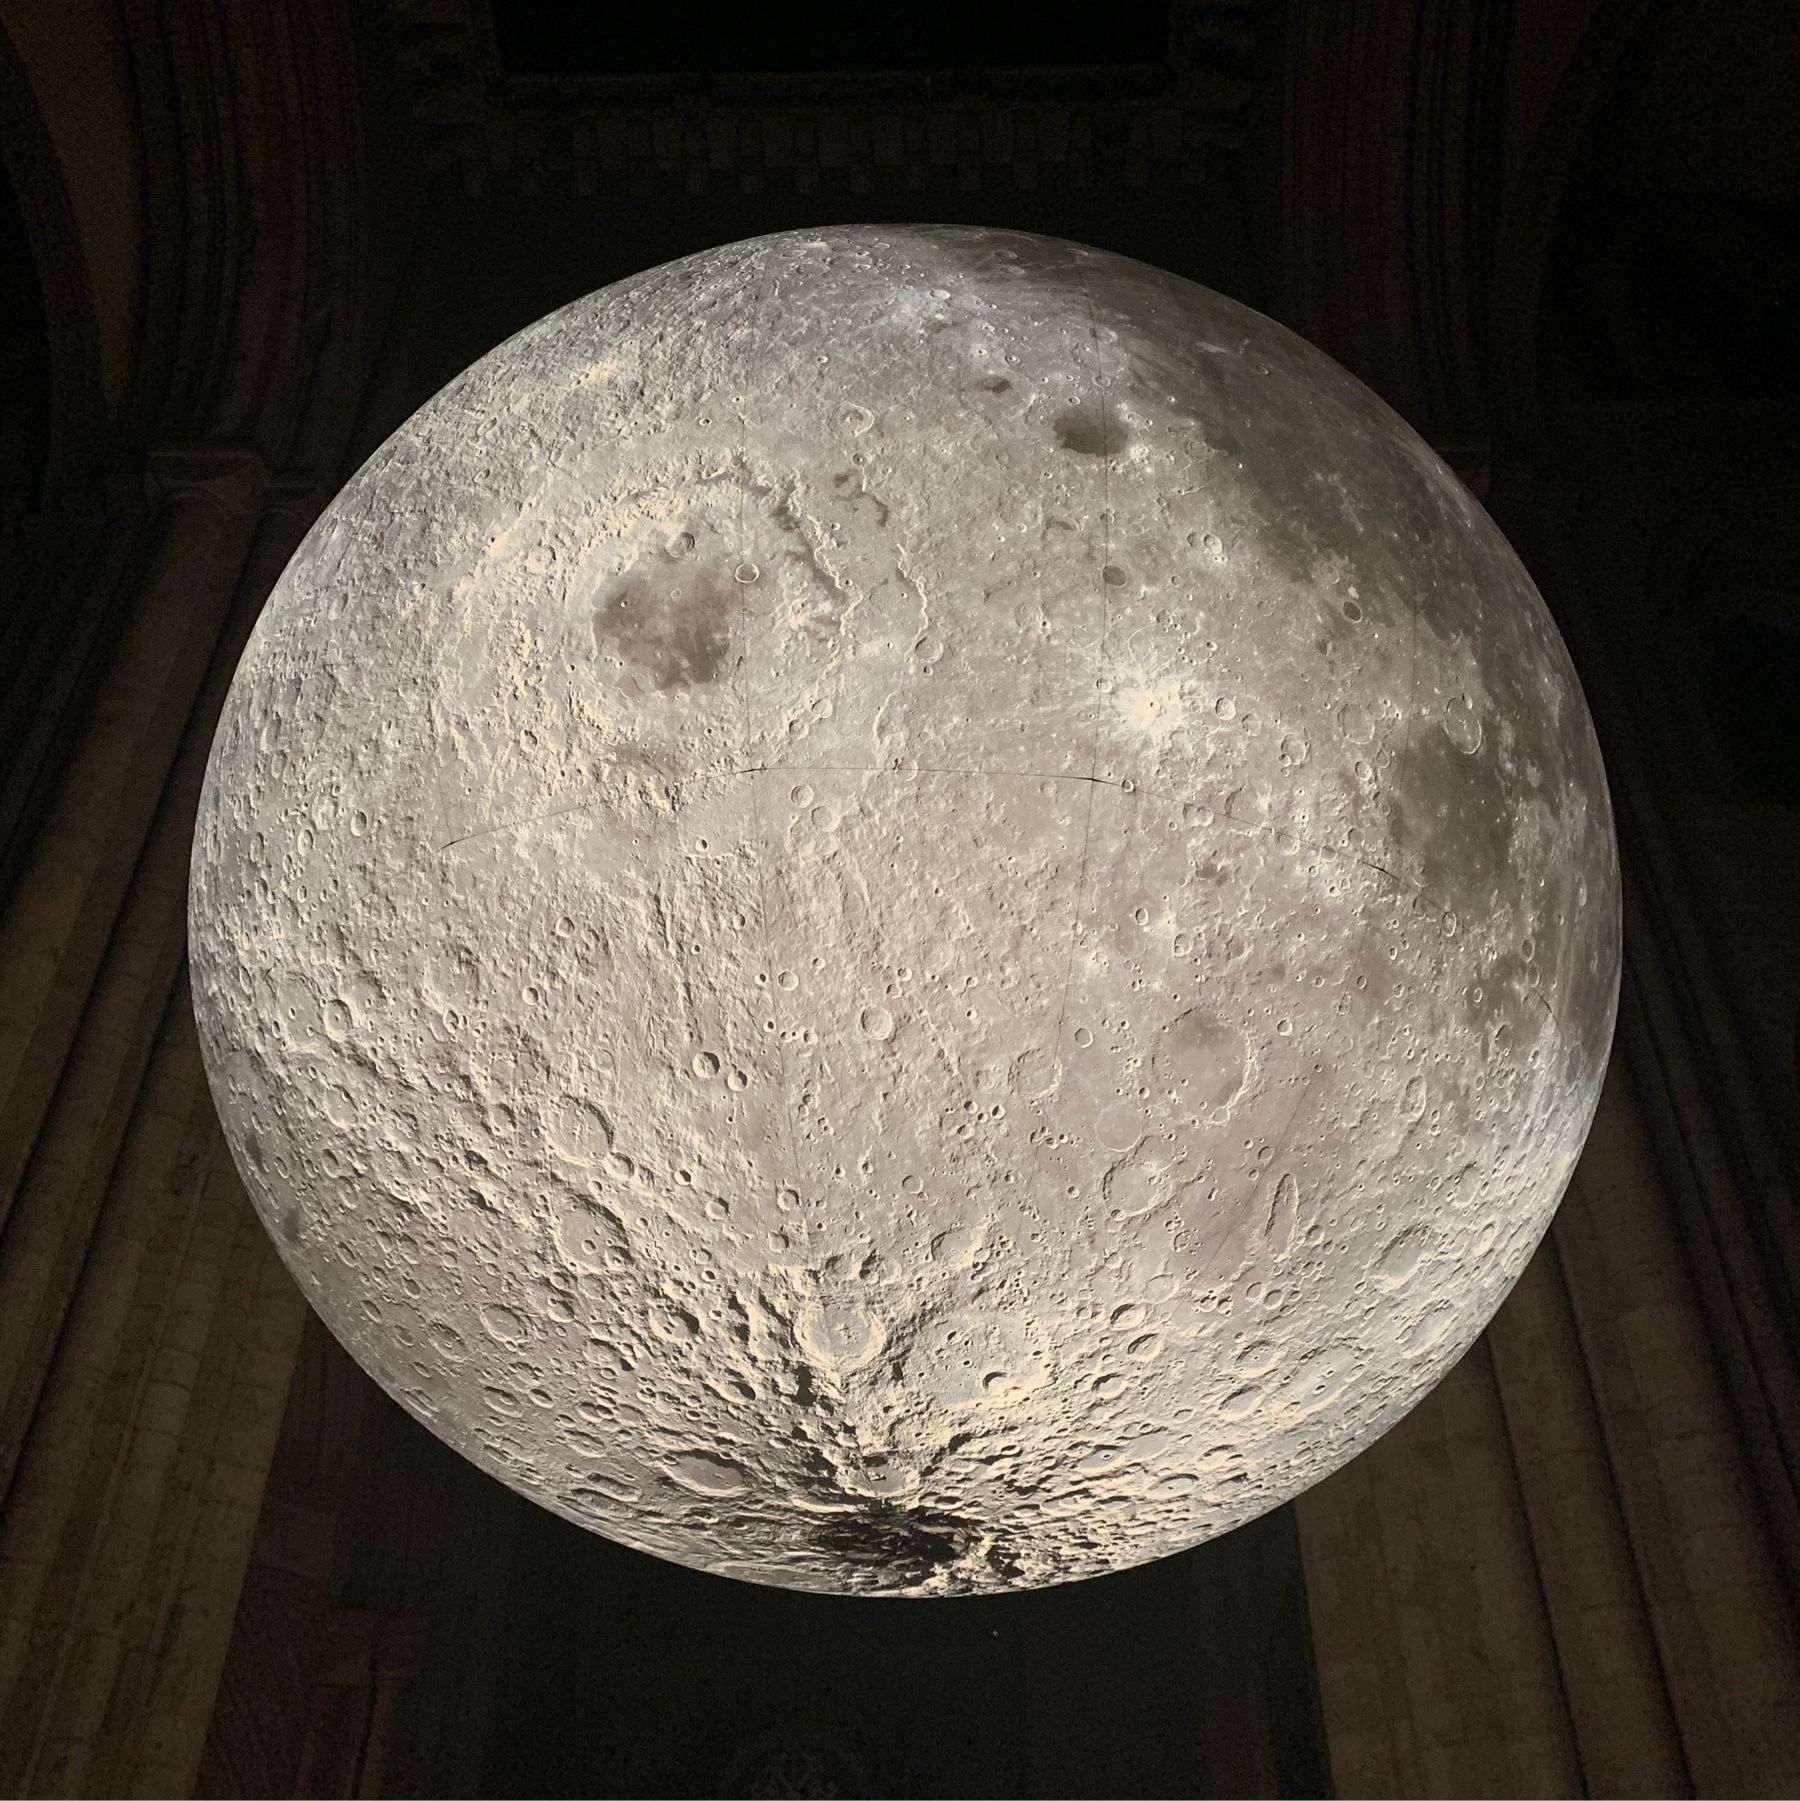 Illuminated inflatable moon suspended above the altar of Durham Cathedral